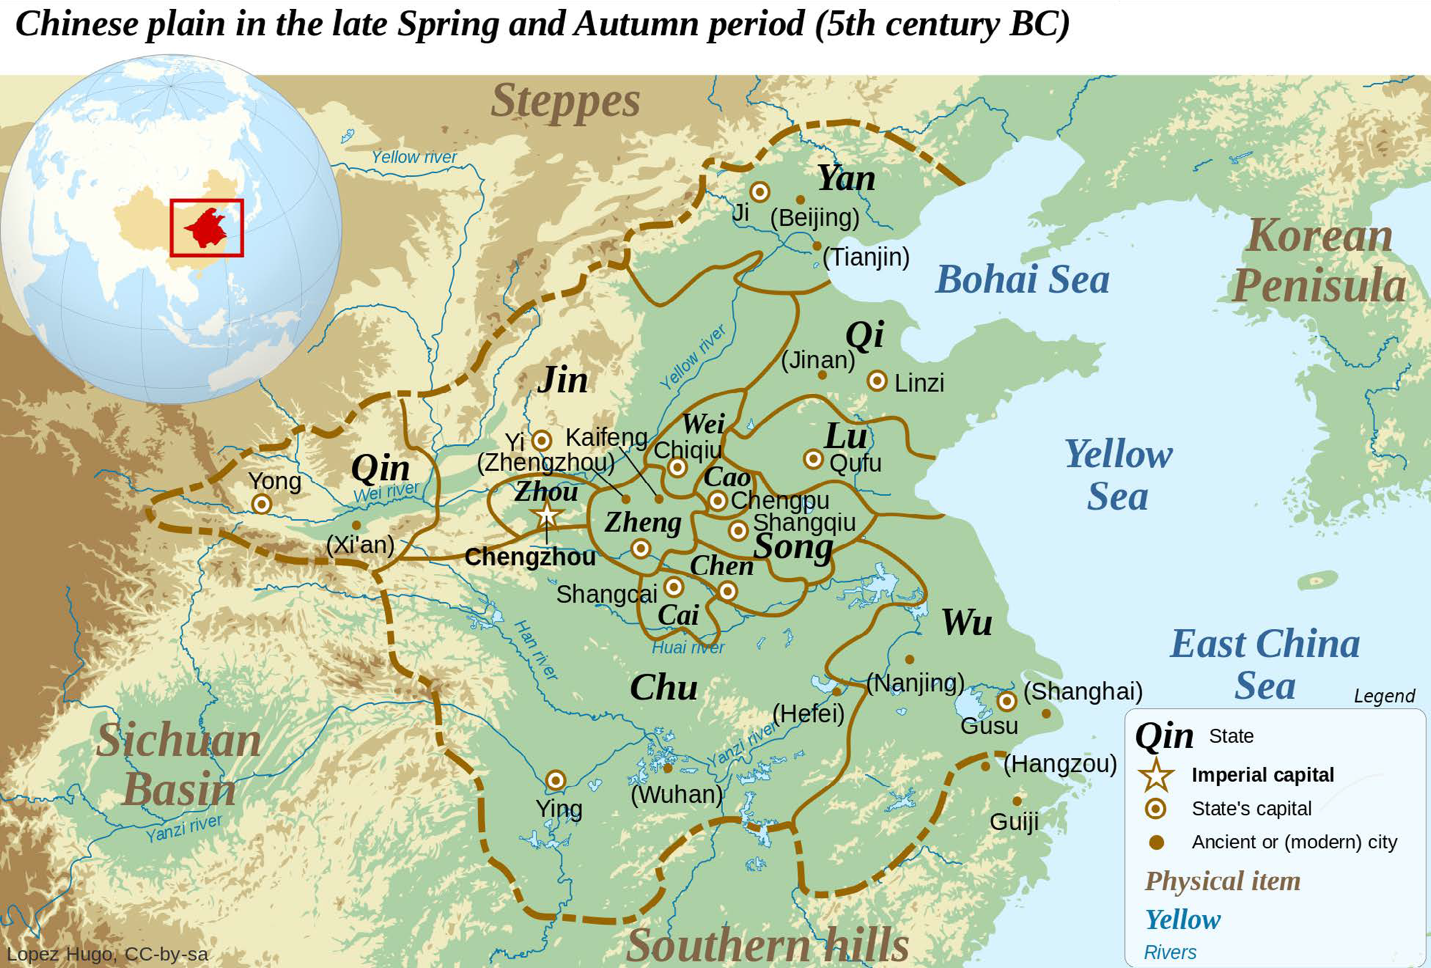 Map of Eastern Zhou States (fifth century)